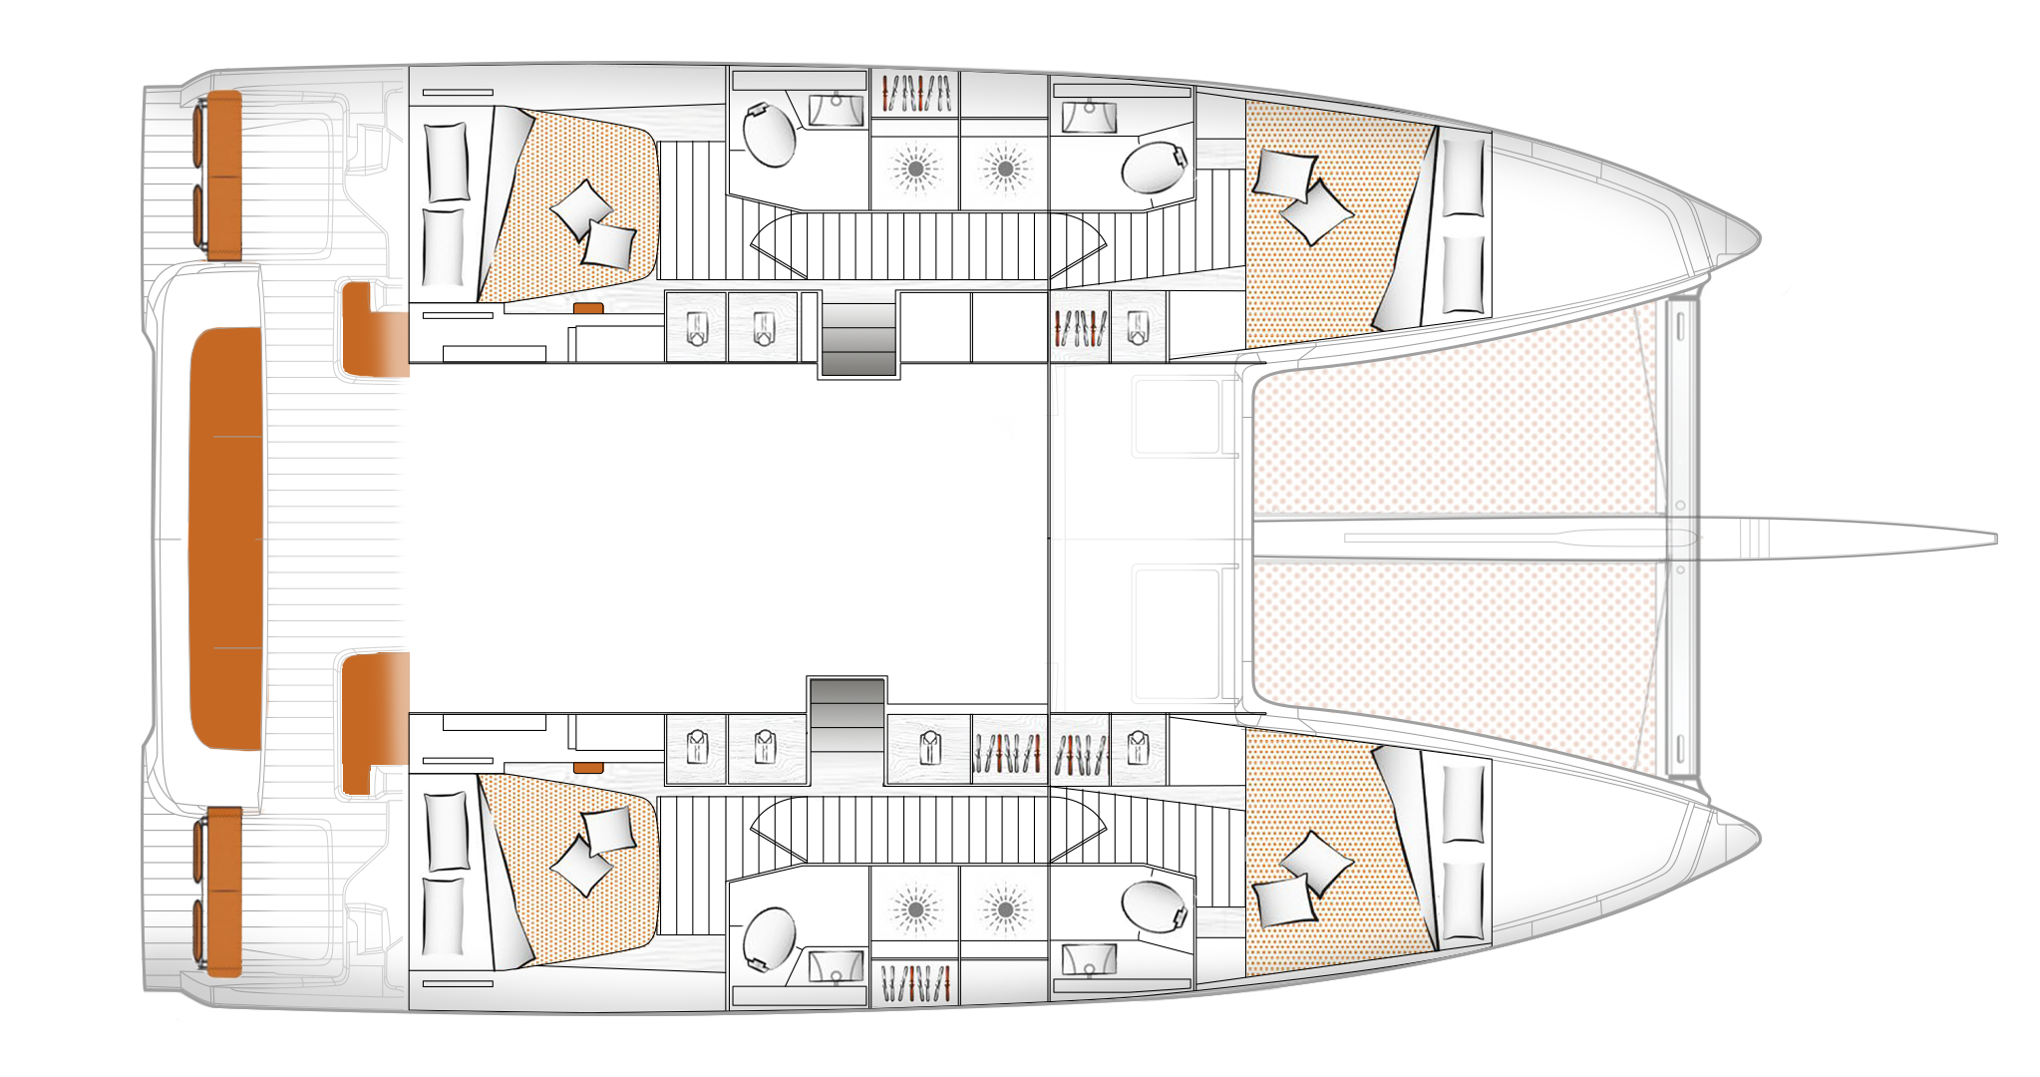 Excess 14 Cabin Options: 4 Cabin 4 Head Layout